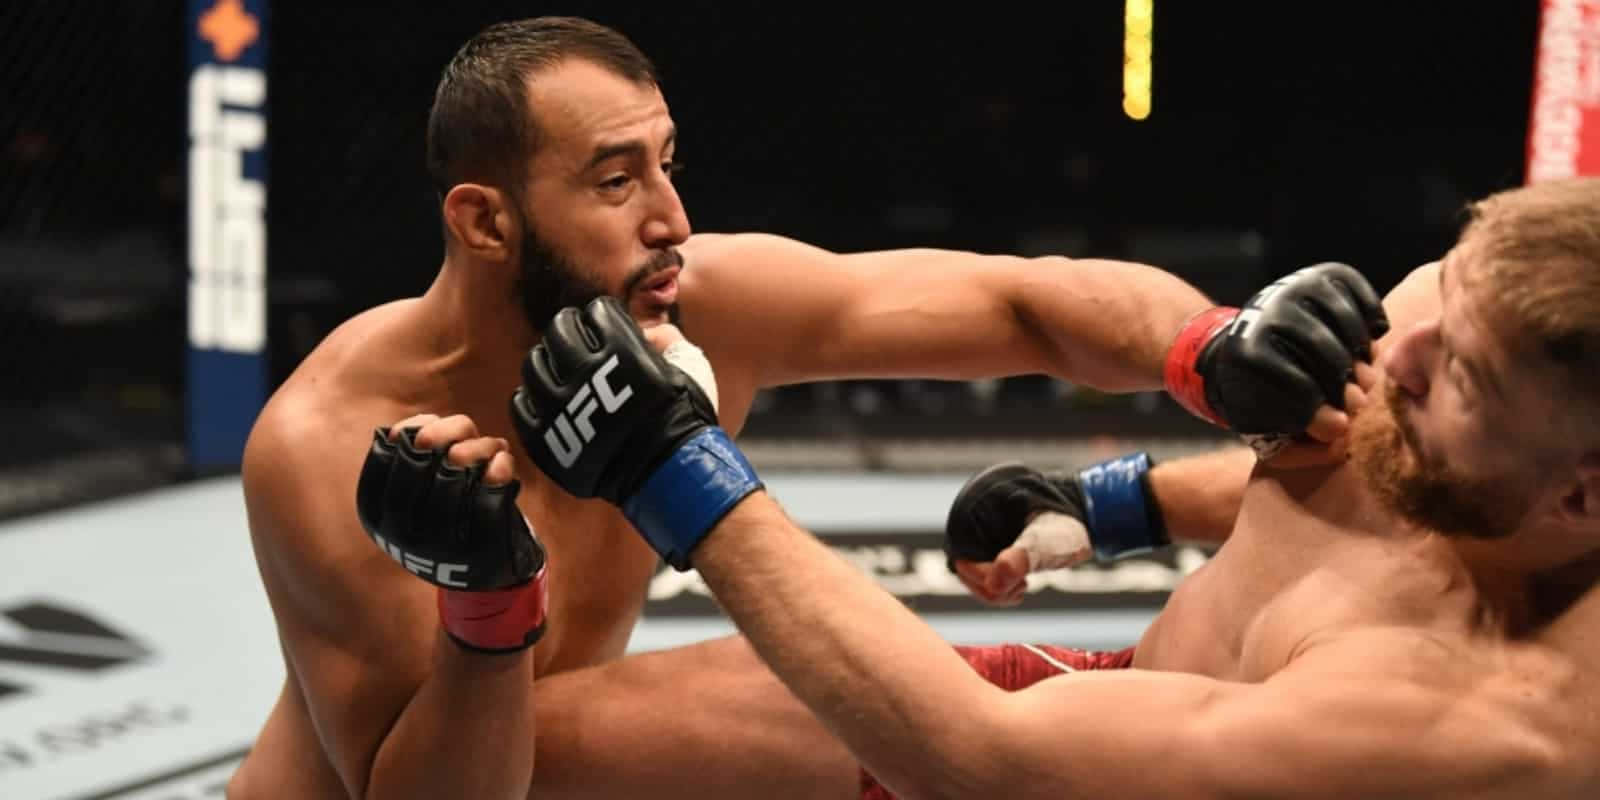 Mma Fighter Dominick Reyes In Action Wallpaper